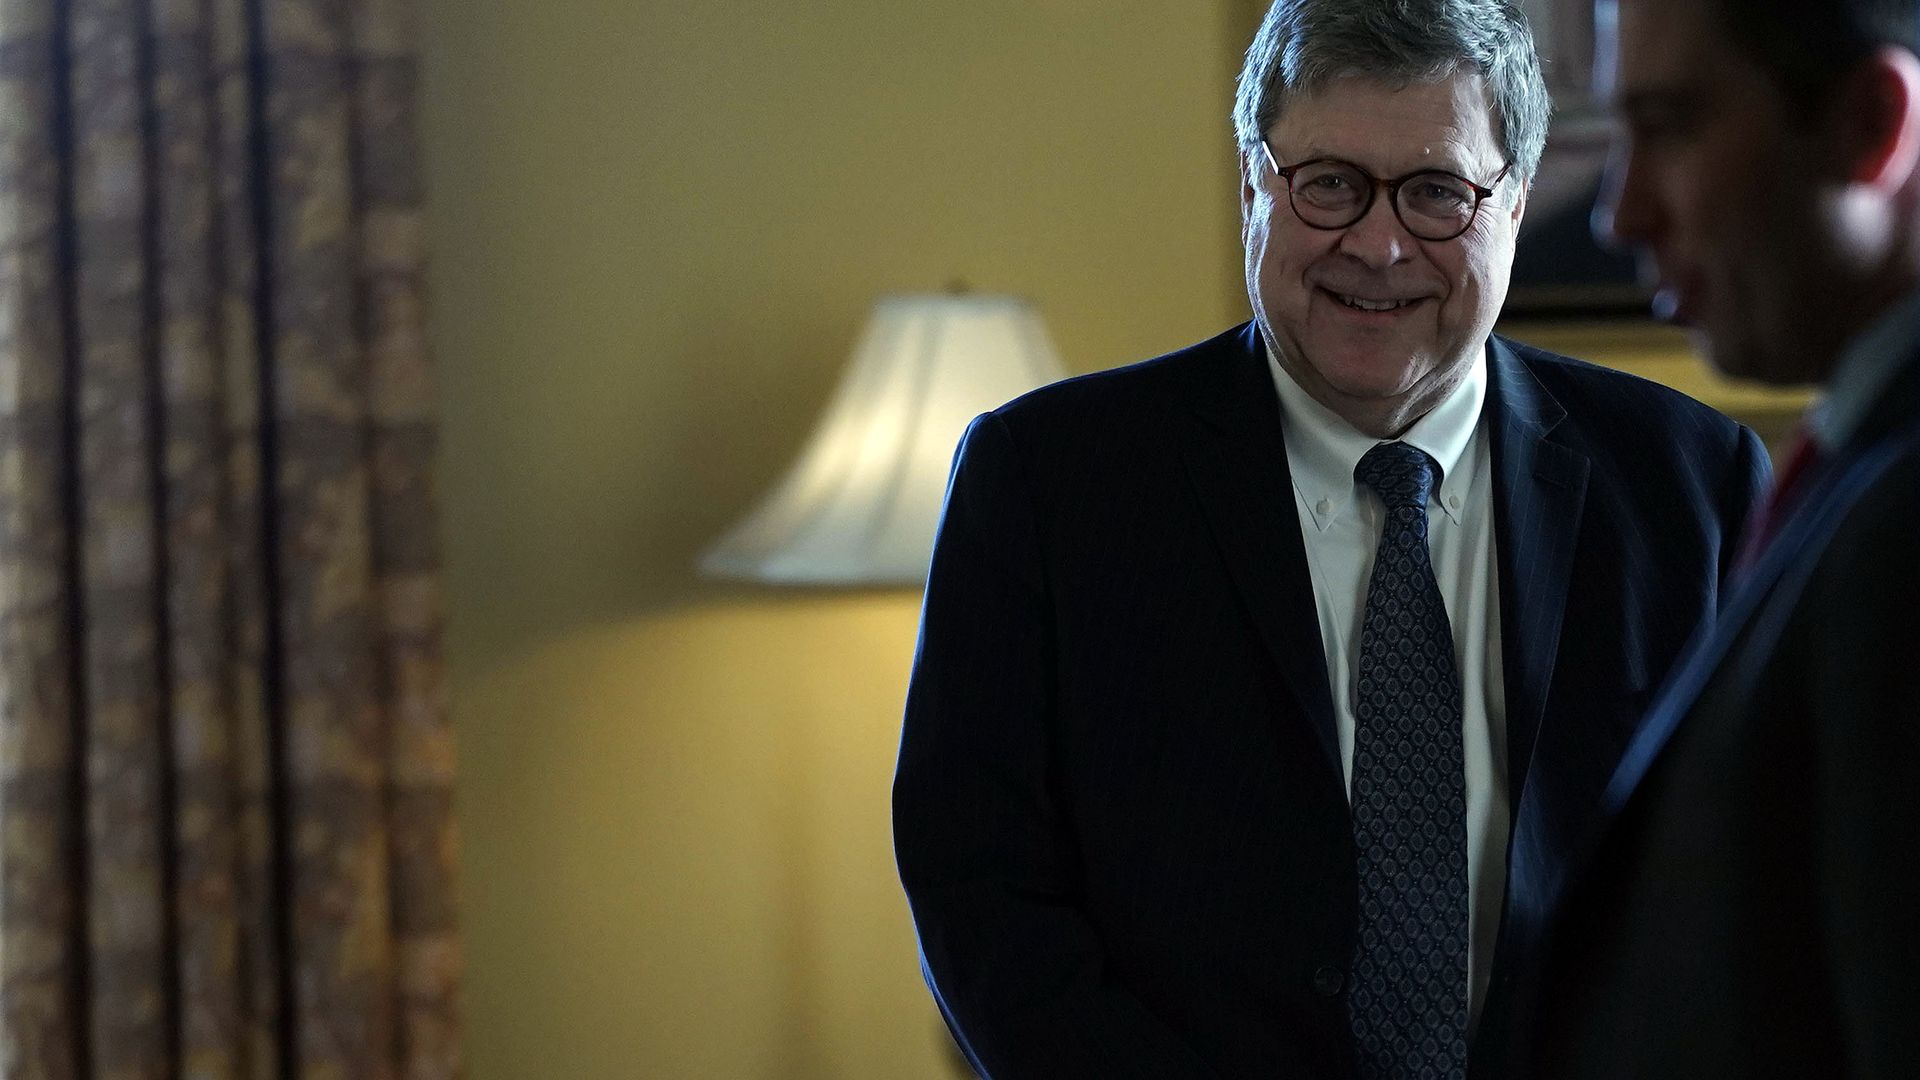 William Barr in a suit smiling